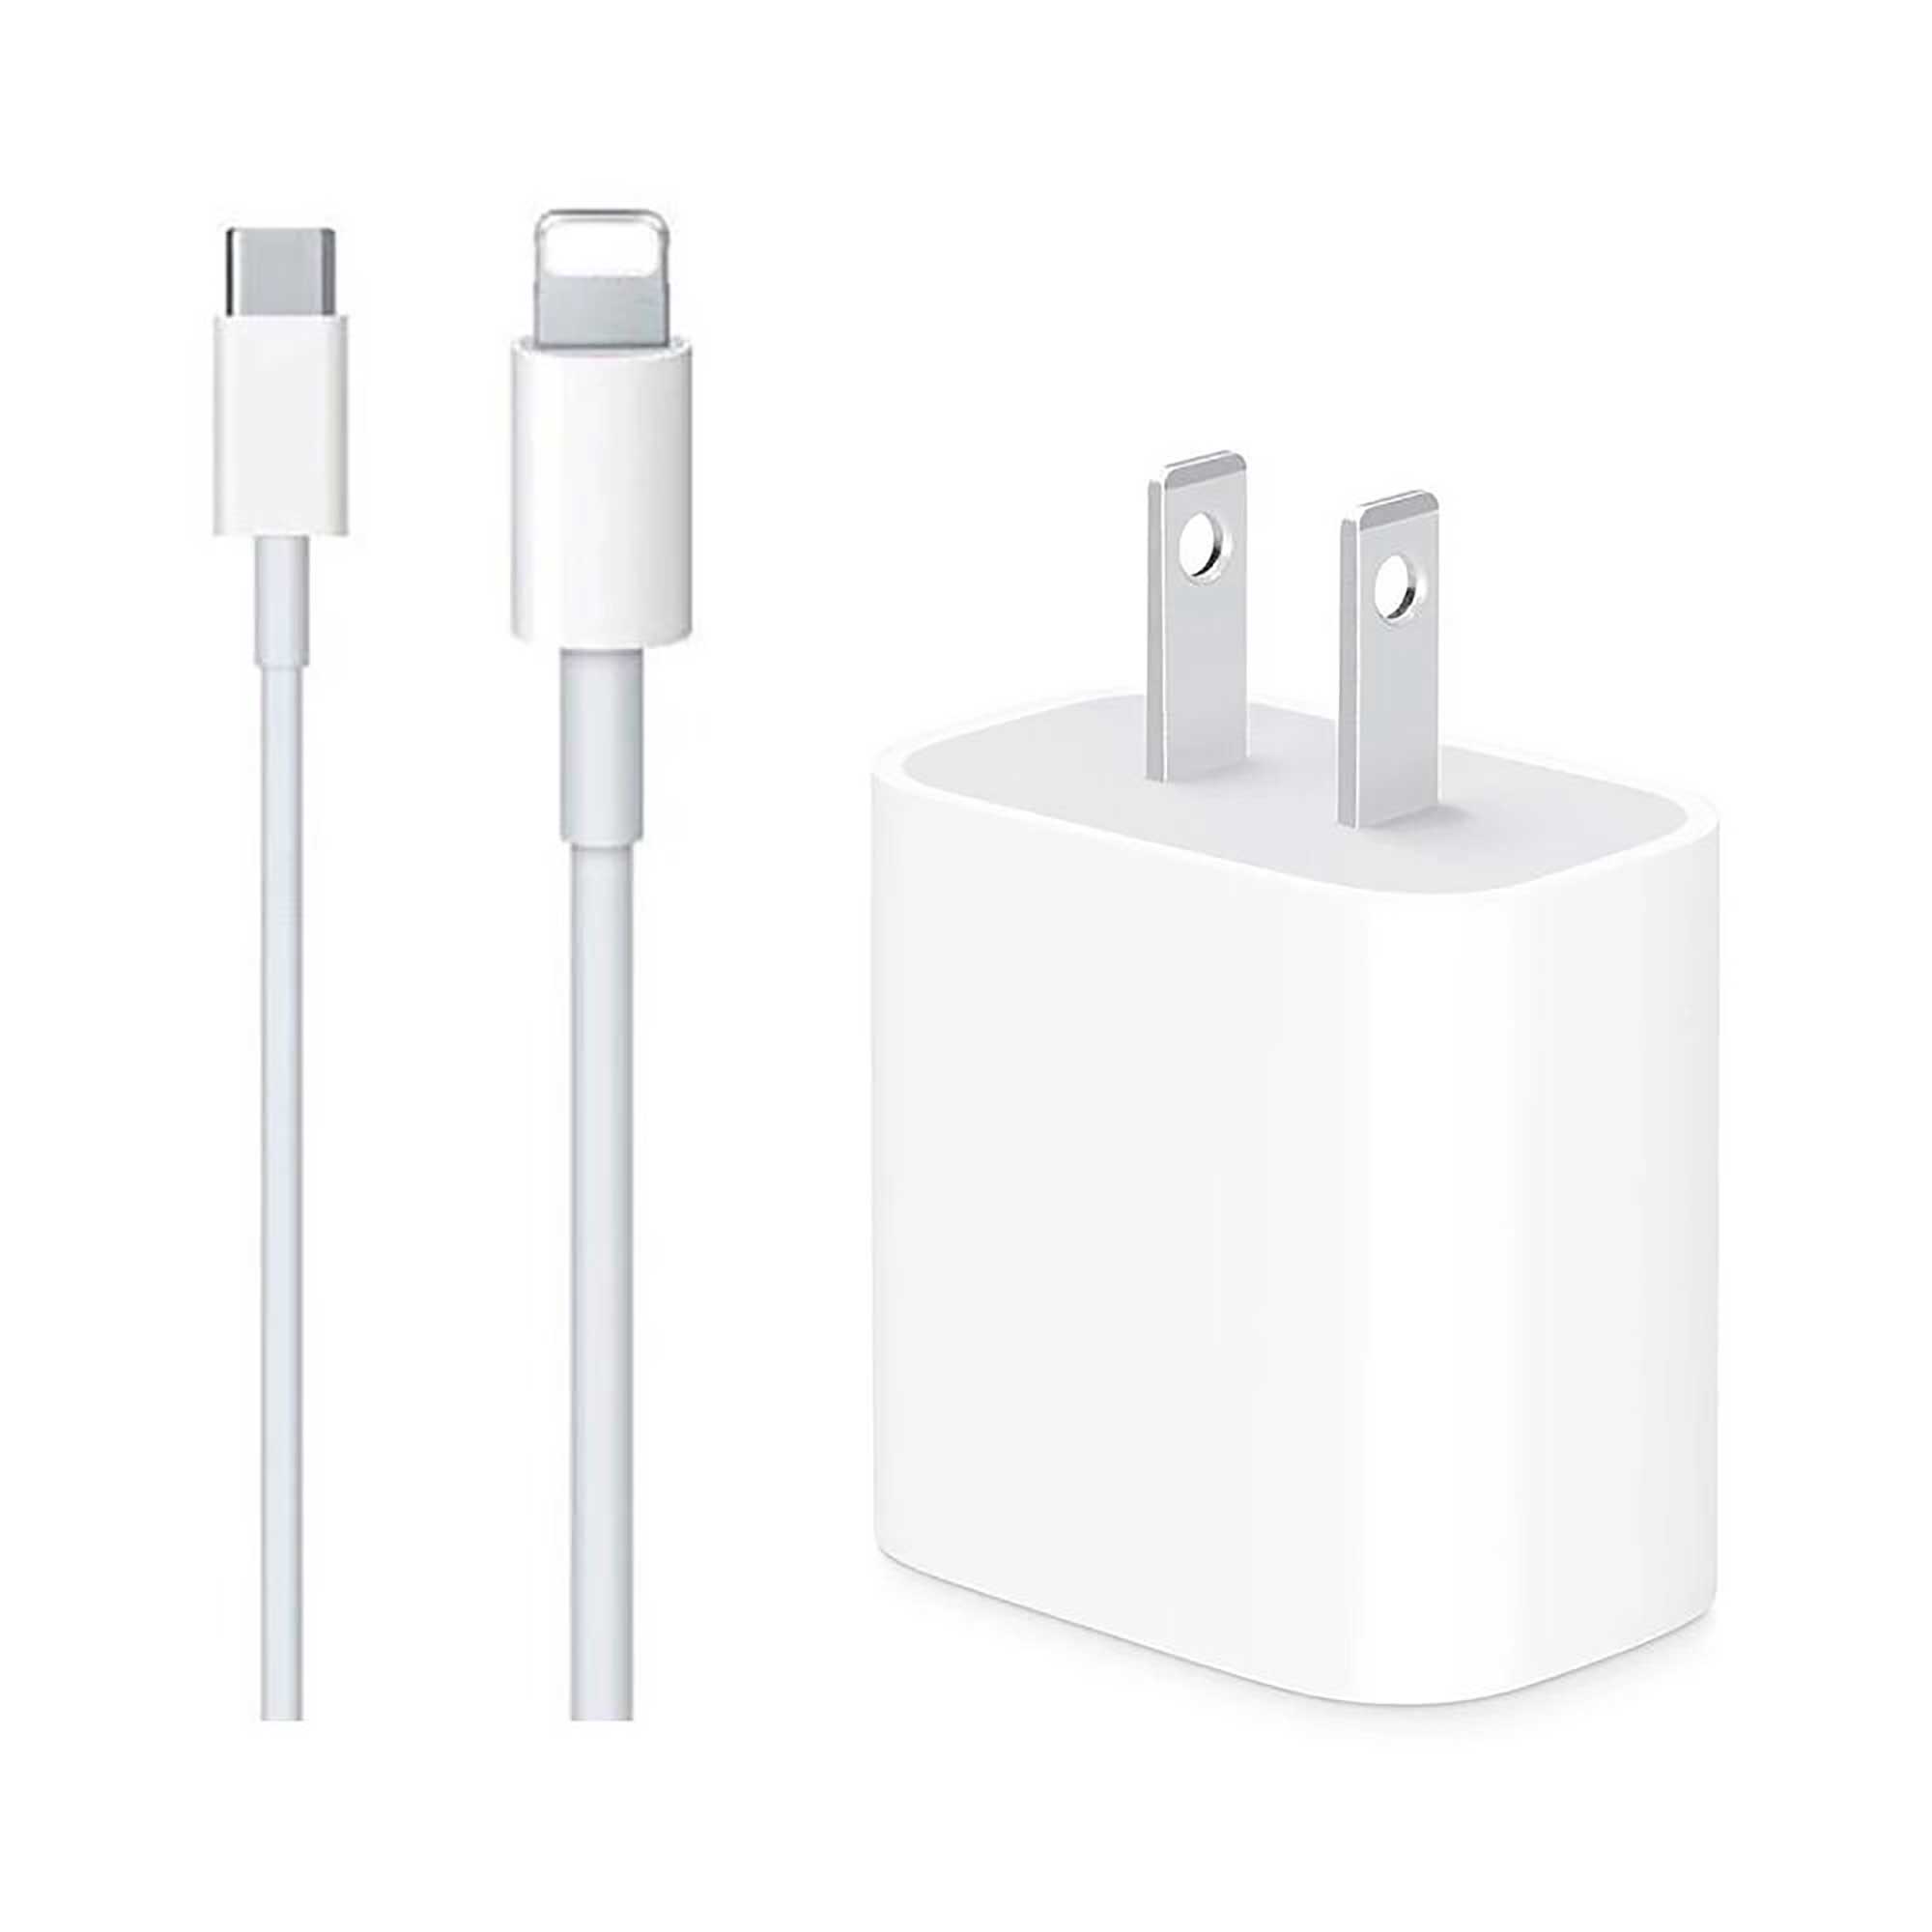 USB-C Cable Genuine Original 100% Apple iPhone charger for iPhone XS ...